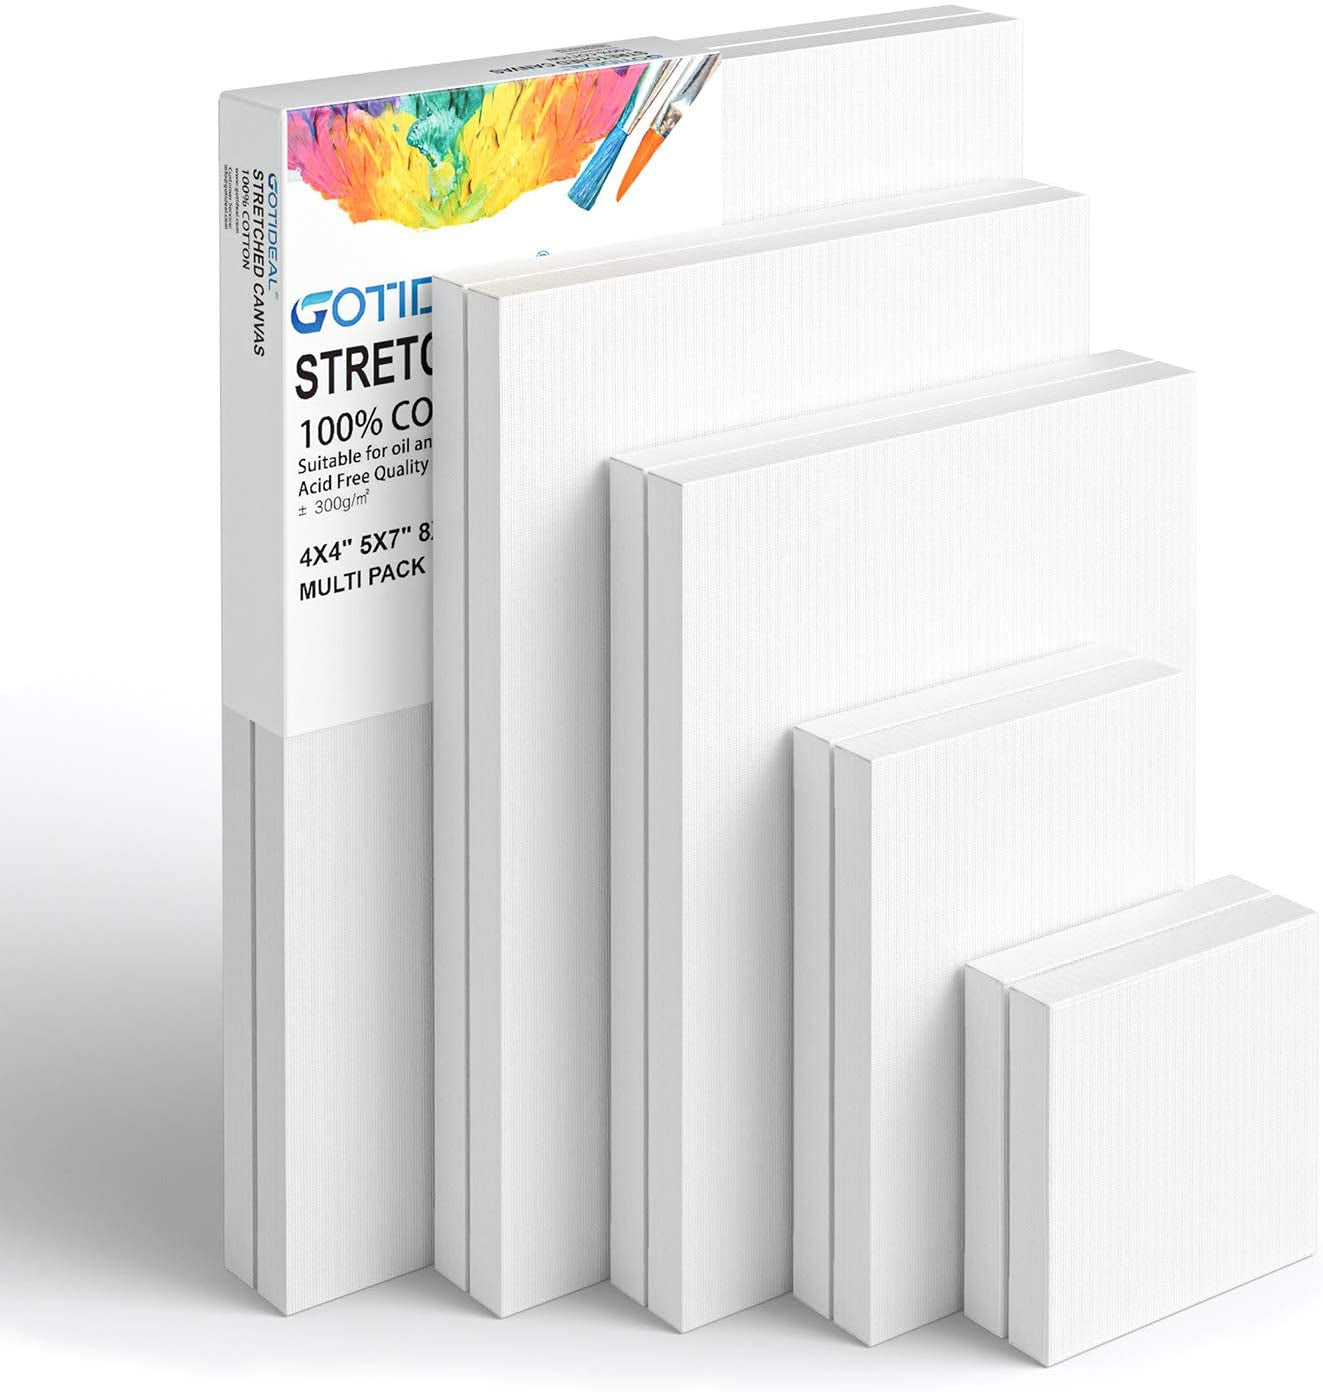 2 Pack Stretched White Canvas Boards for Painting for Acrylic, Oil Paints  36x48